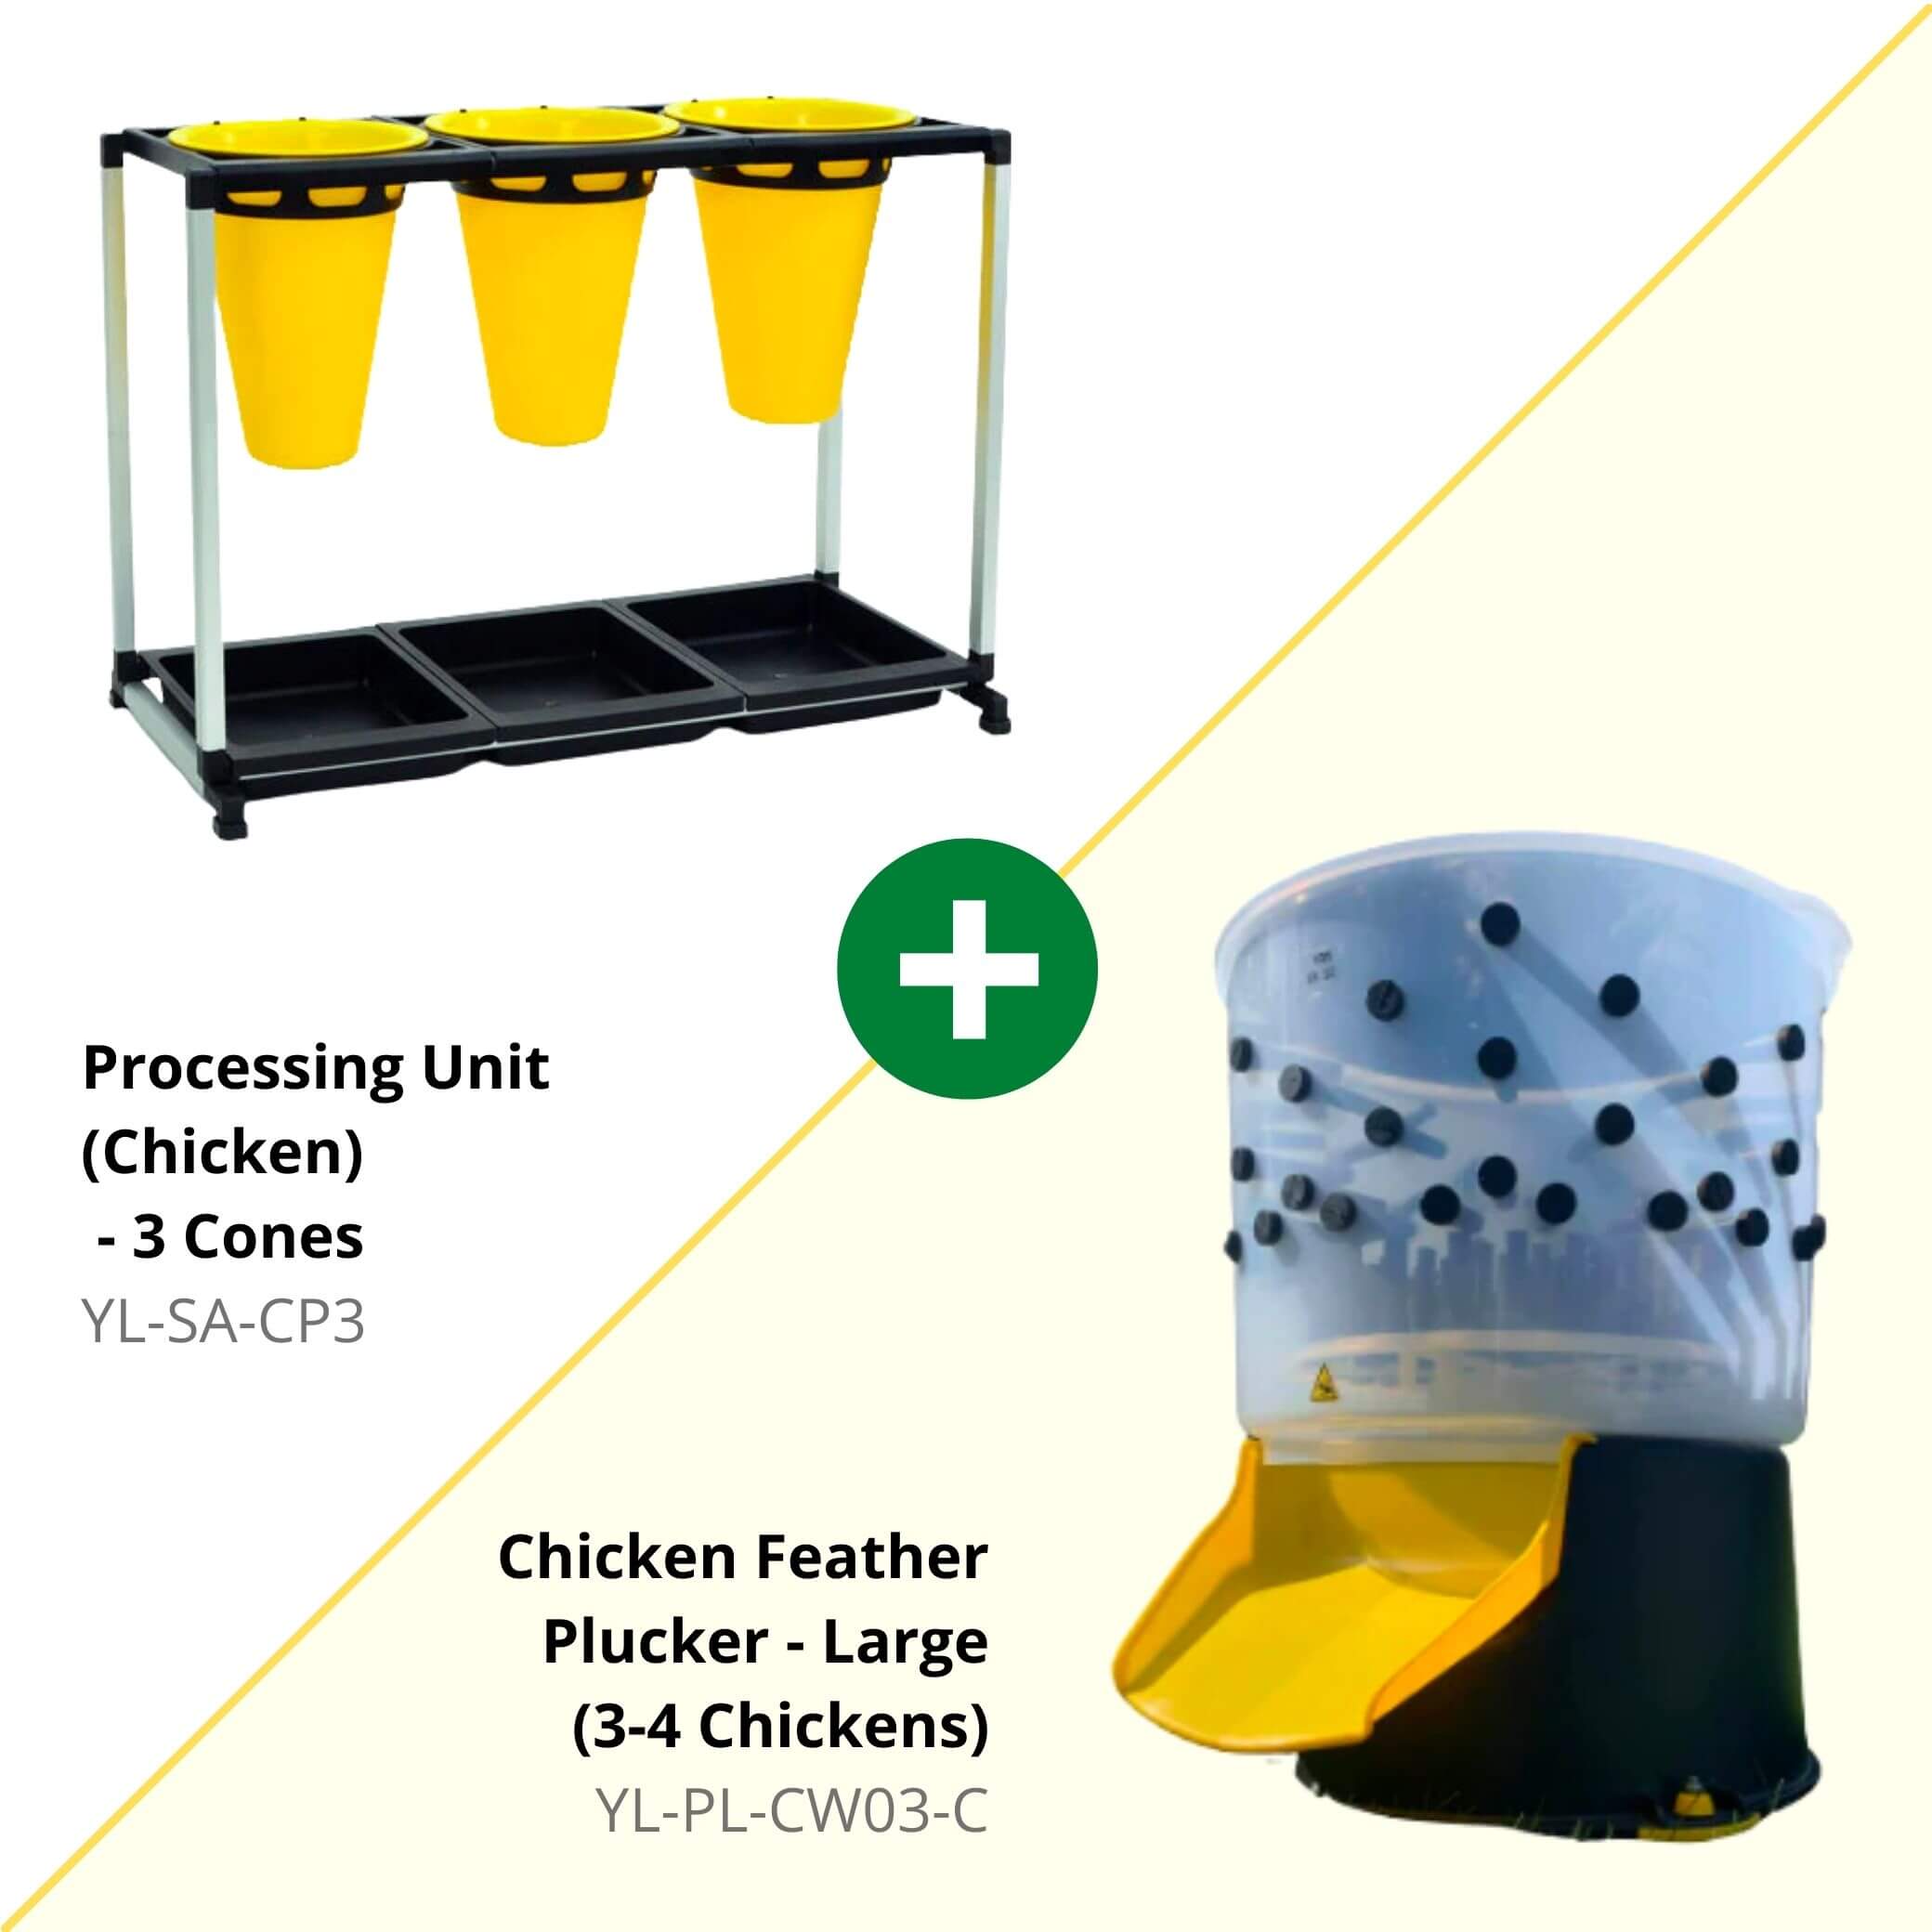 Hatching Time Cimuka. Image shows that kit comes with Processing cones and Feather plucker for chickens.